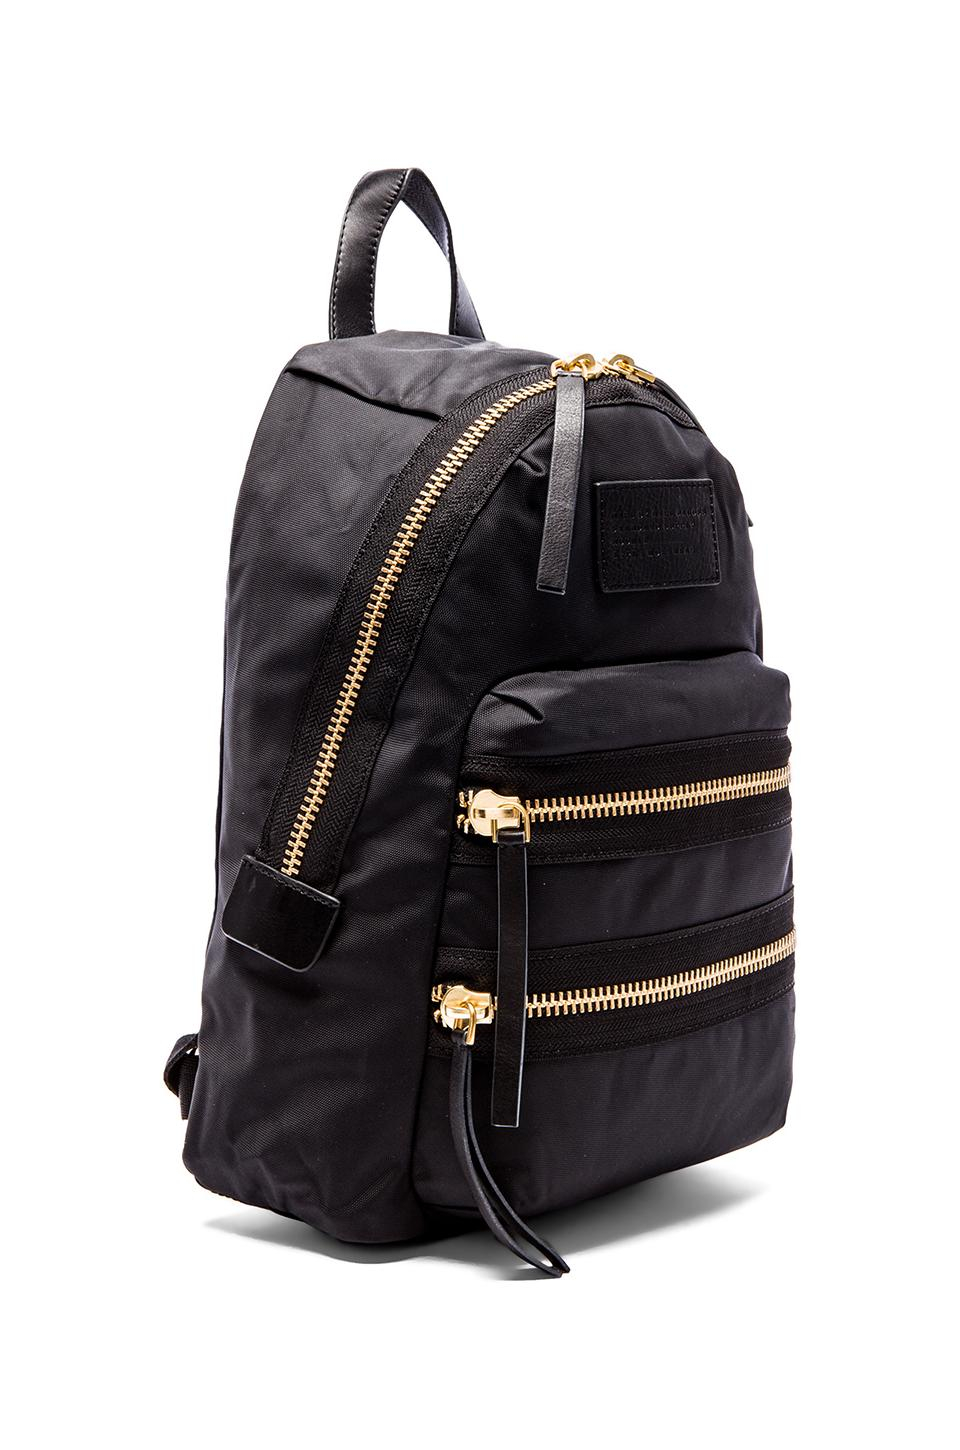 Lyst - Marc By Marc Jacobs Domo Arigato Mini Packrat Backpack in Black